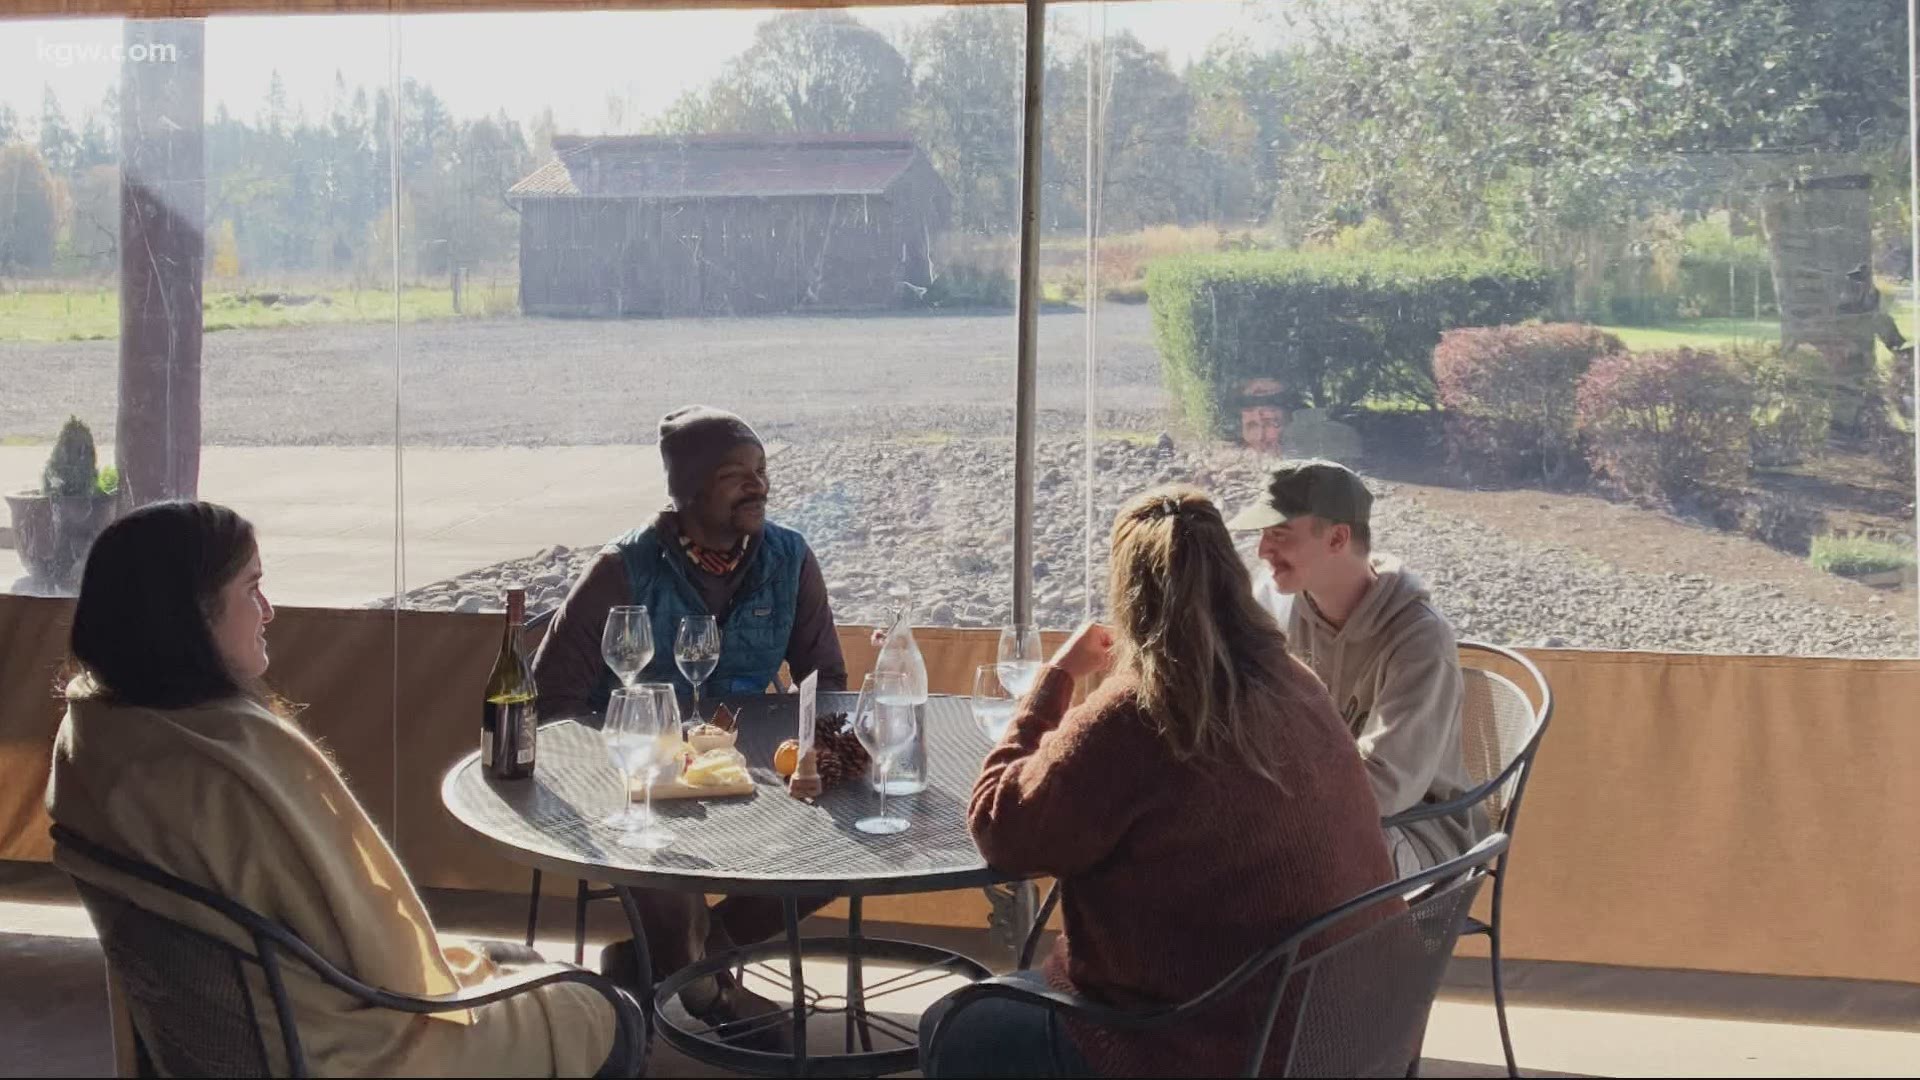 Local wineries' biggest sales period of the year aligned with the governor's two-week freeze on outdoor dining, resulting in a major financial hit.